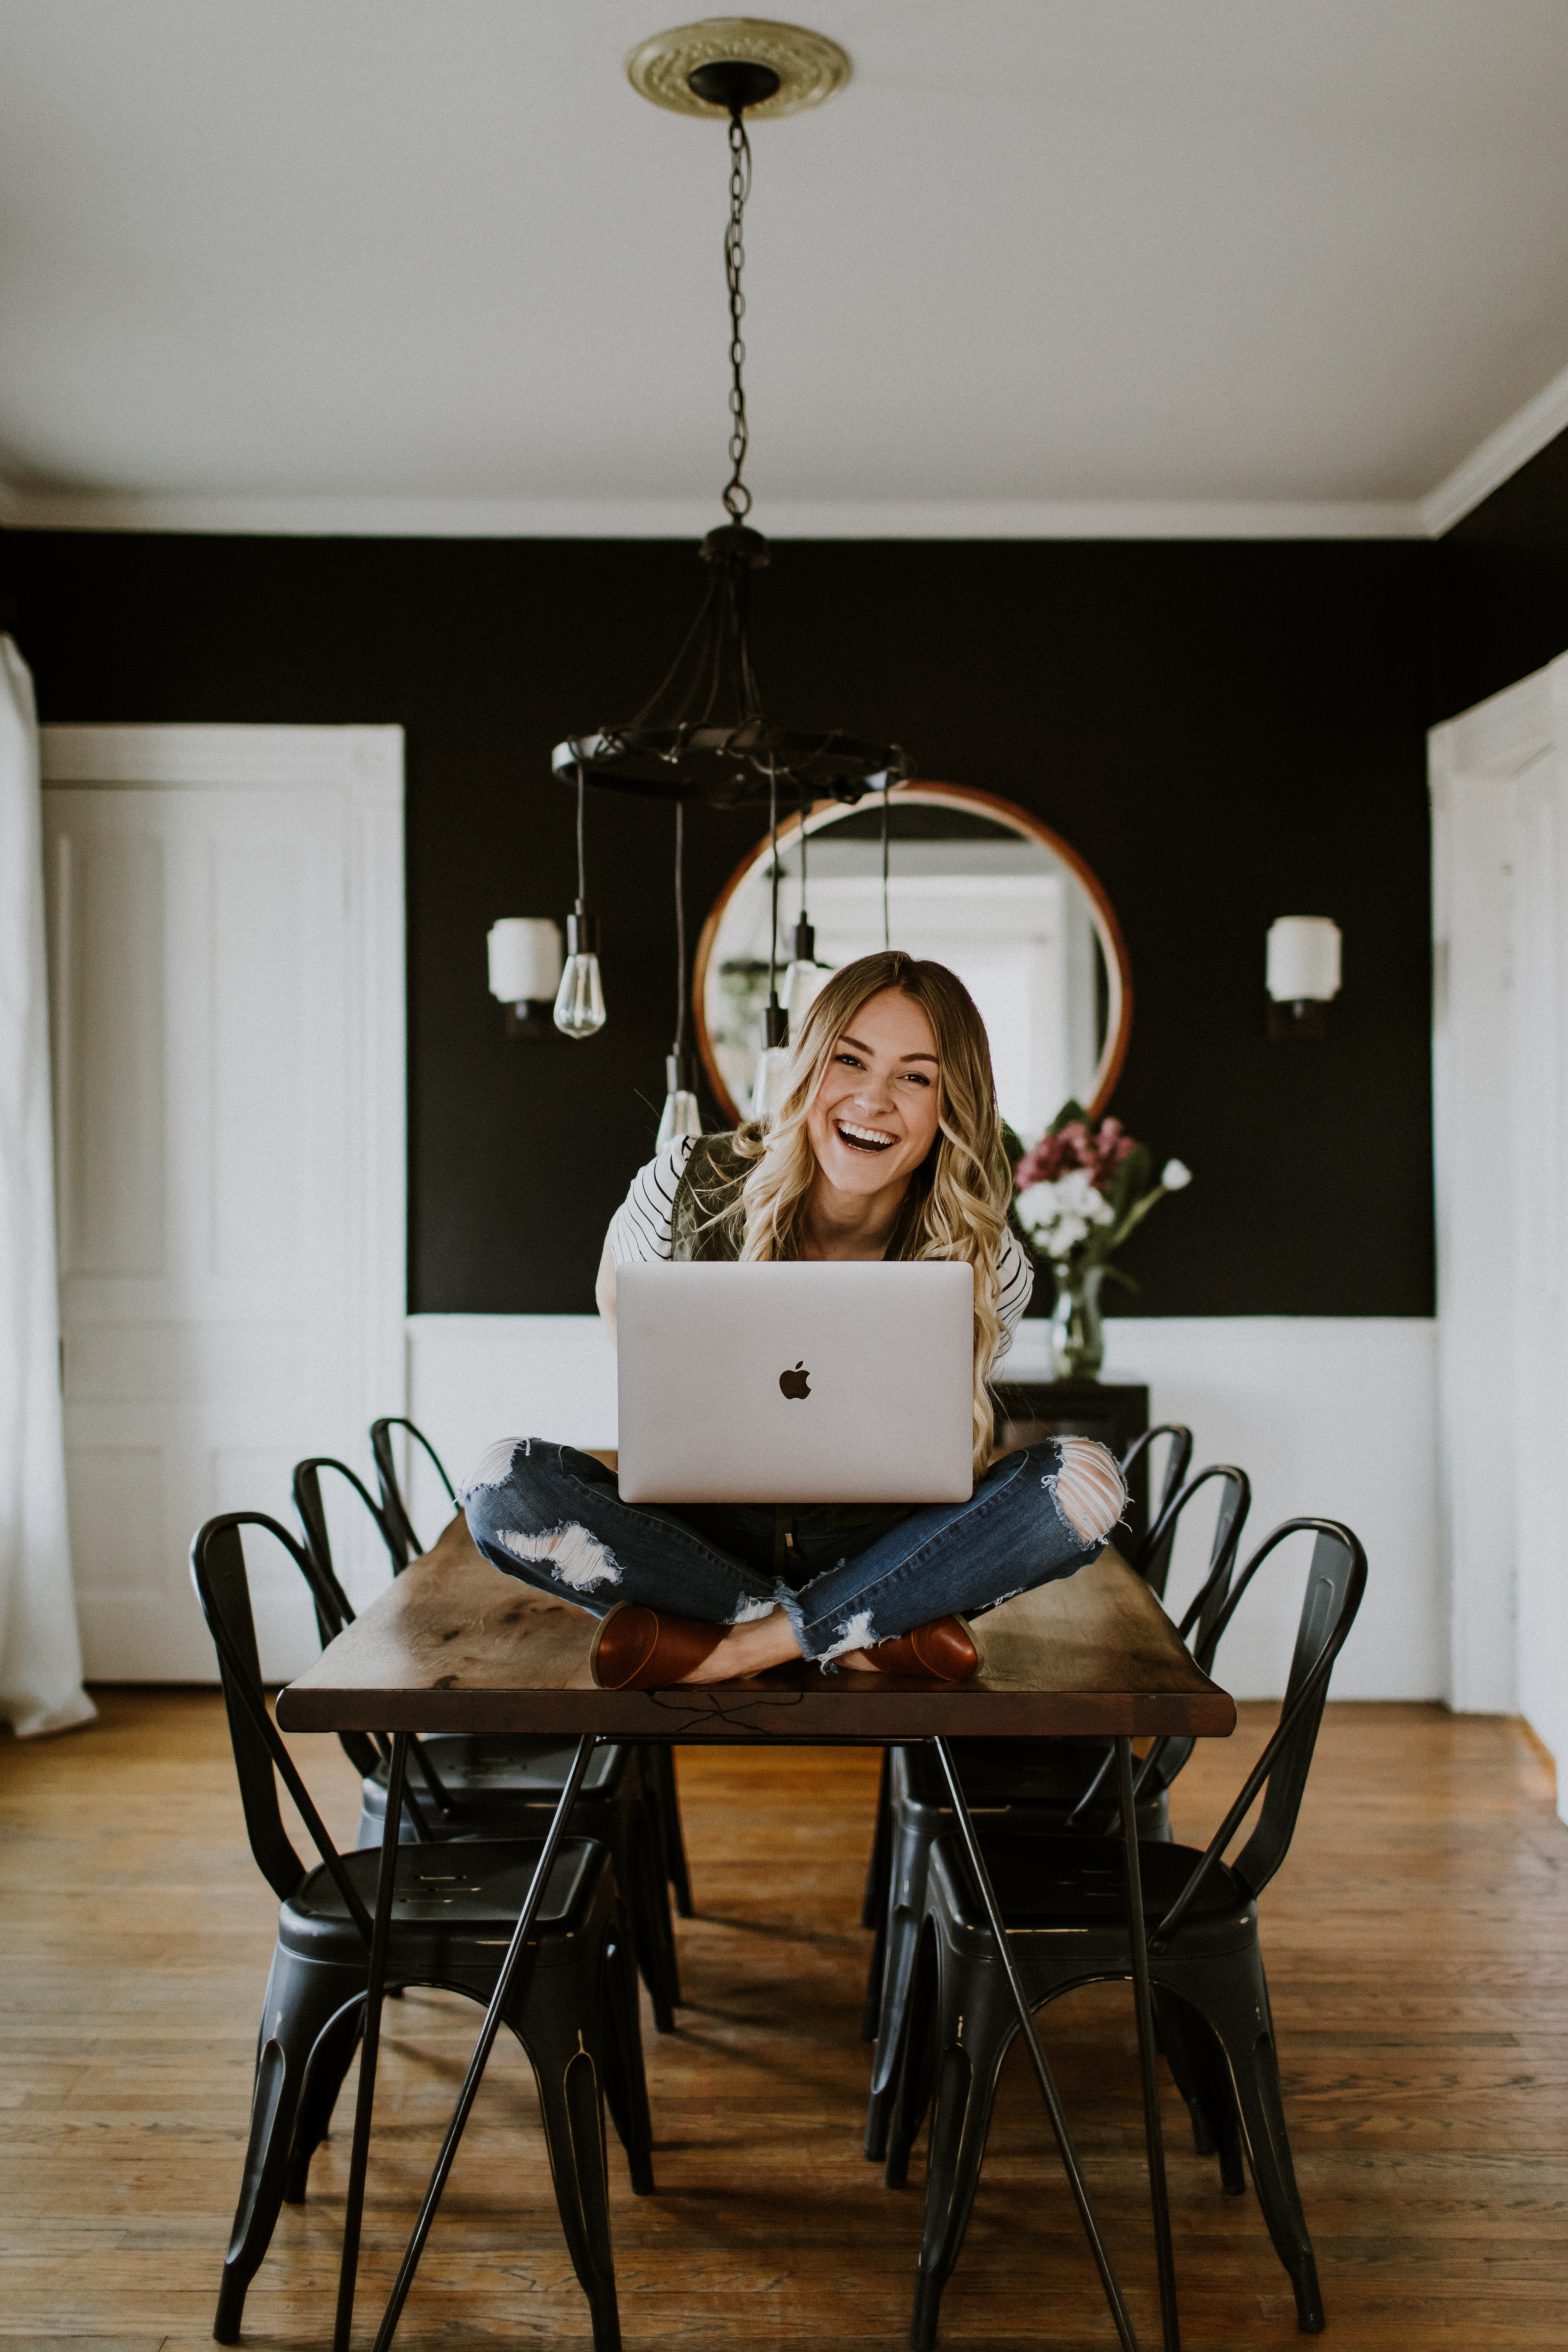 How to Start an Online Business - The Right Way (Legally) | Miranda Schroeder Blog